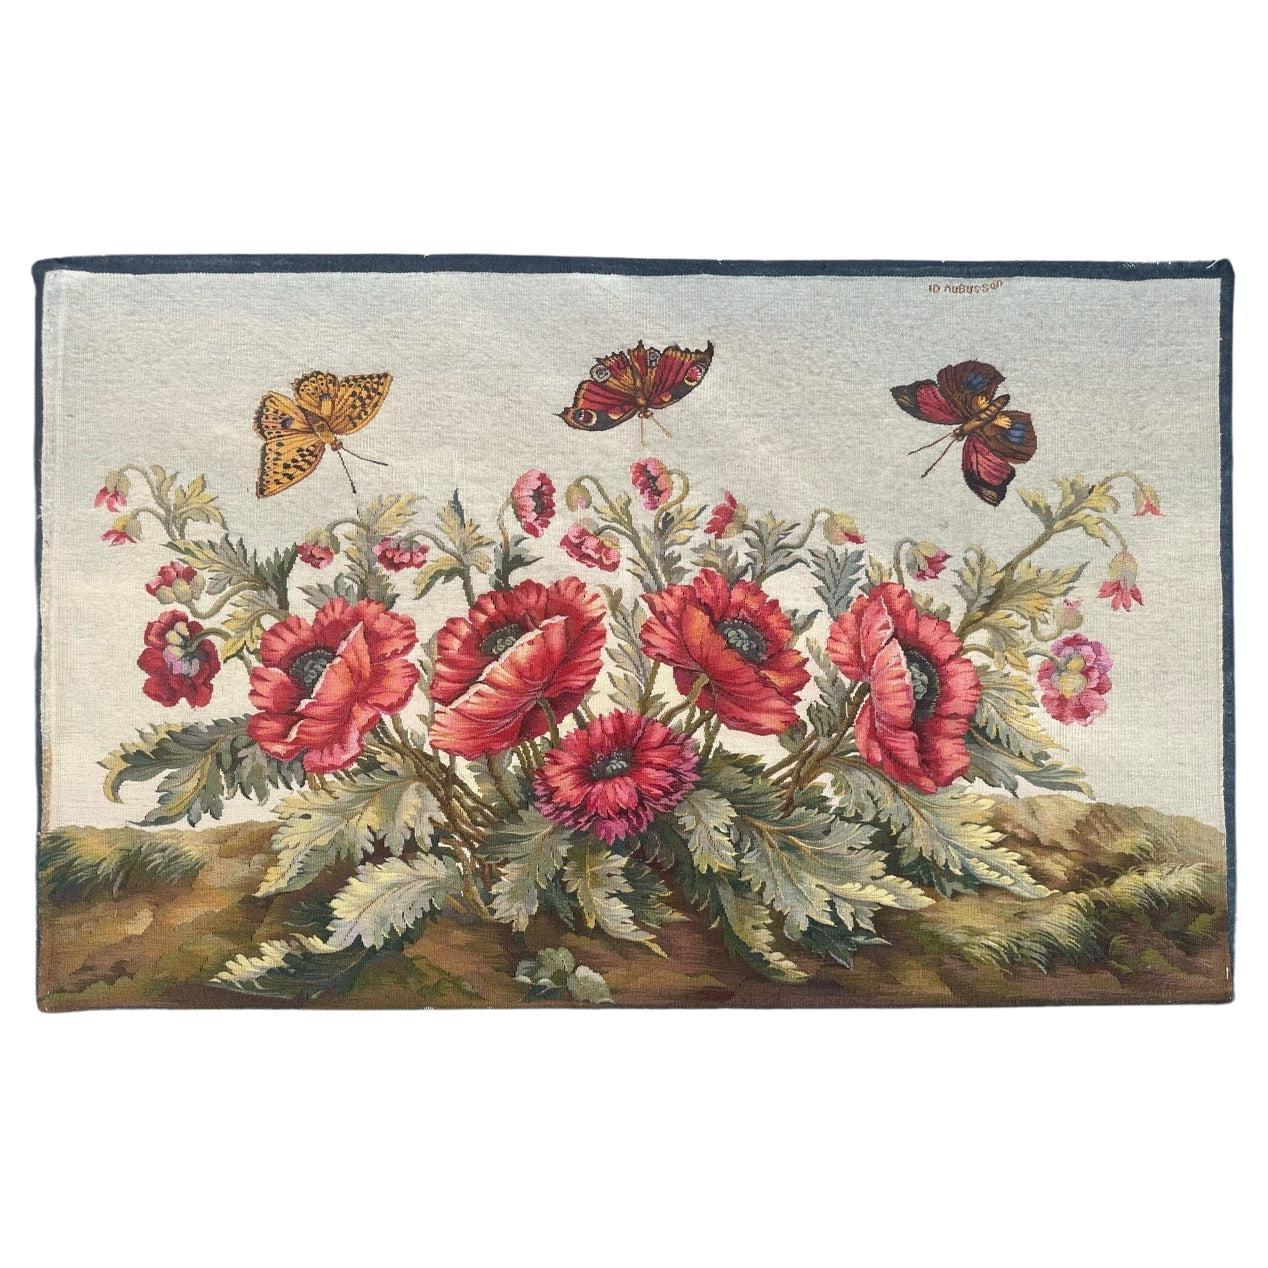 Bobyrug’s wonderful French Aubusson Tapestry, flowers and butterflies design 